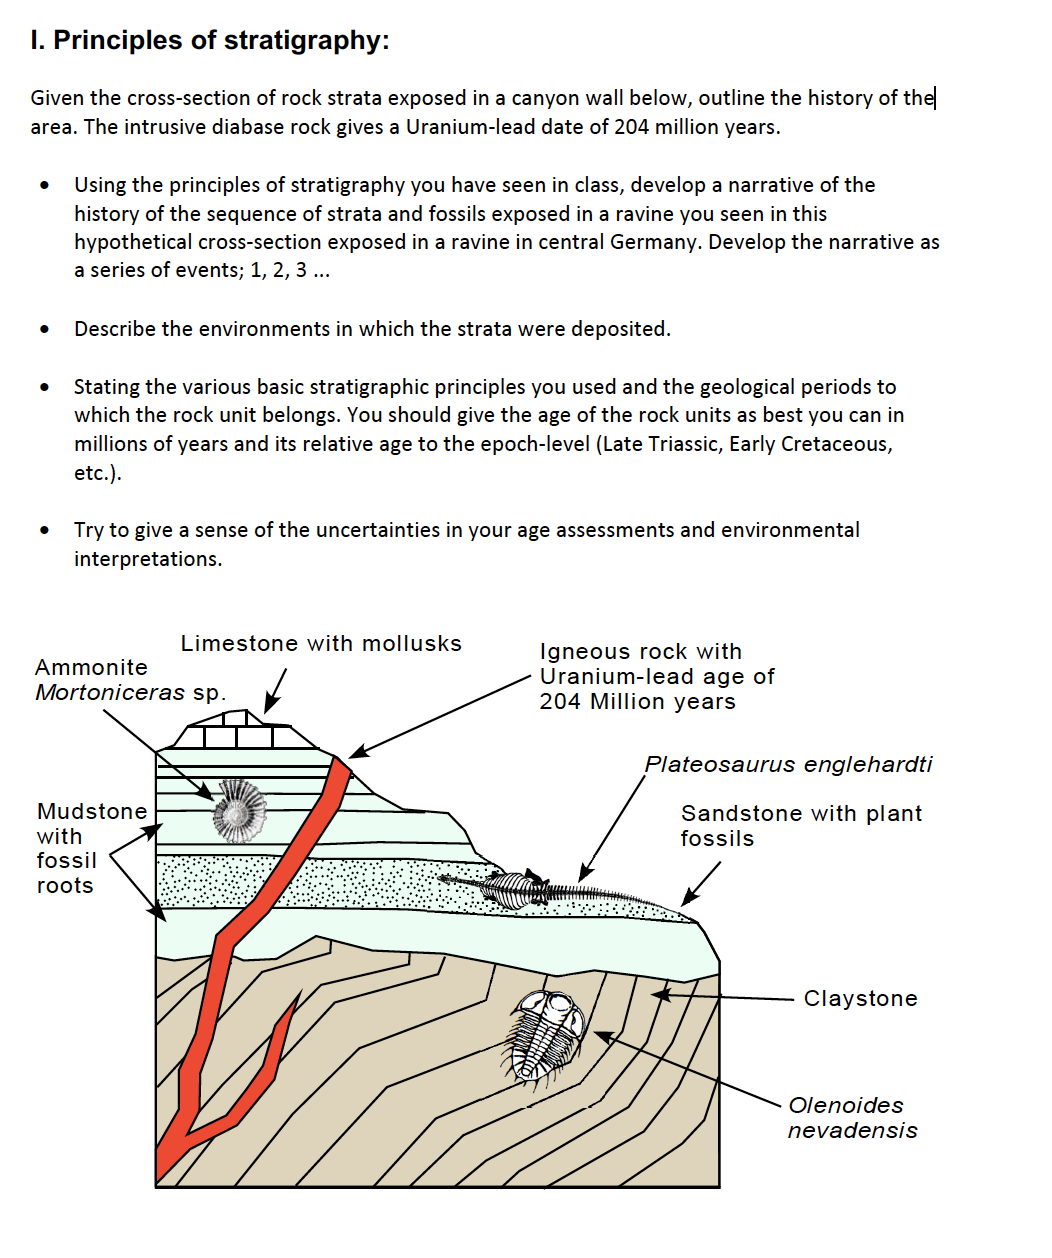 I. Principles of stratigraphy:
Given the cross-section of rock strata exposed in a canyon wall below, outline the history of the
area. The intrusive diabase rock gives a Uranium-lead date of 204 million years.
Using the principles of stratigraphy you have seen in class, develop a narrative of the
history of the sequence of strata and fossils exposed in a ravine you seen in this
hypothetical cross-section exposed in a ravine in central Germany. Develop the narrative as
a series of events; 1, 2, 3 ...
Describe the environments in which the strata were deposited.
Stating the various basic stratigraphic principles you used and the geological periods to
which the rock unit belongs. You should give the age of the rock units as best you can in
millions of years and its relative age to the epoch-level (Late Triassic, Early Cretaceous,
etc.).
Try to give a sense of the uncertainties in your age assessments and environmental
interpretations.
Limestone with mollusks
Igneous rock with
Uranium-lead age of
204 Million years
Ammonite
Mortoniceras sp.
Plateosaurus englehardti
Mudstone
Sandstone with plant
with
fossil
fossils
roots
Claystone
Olenoides
nevadensis
